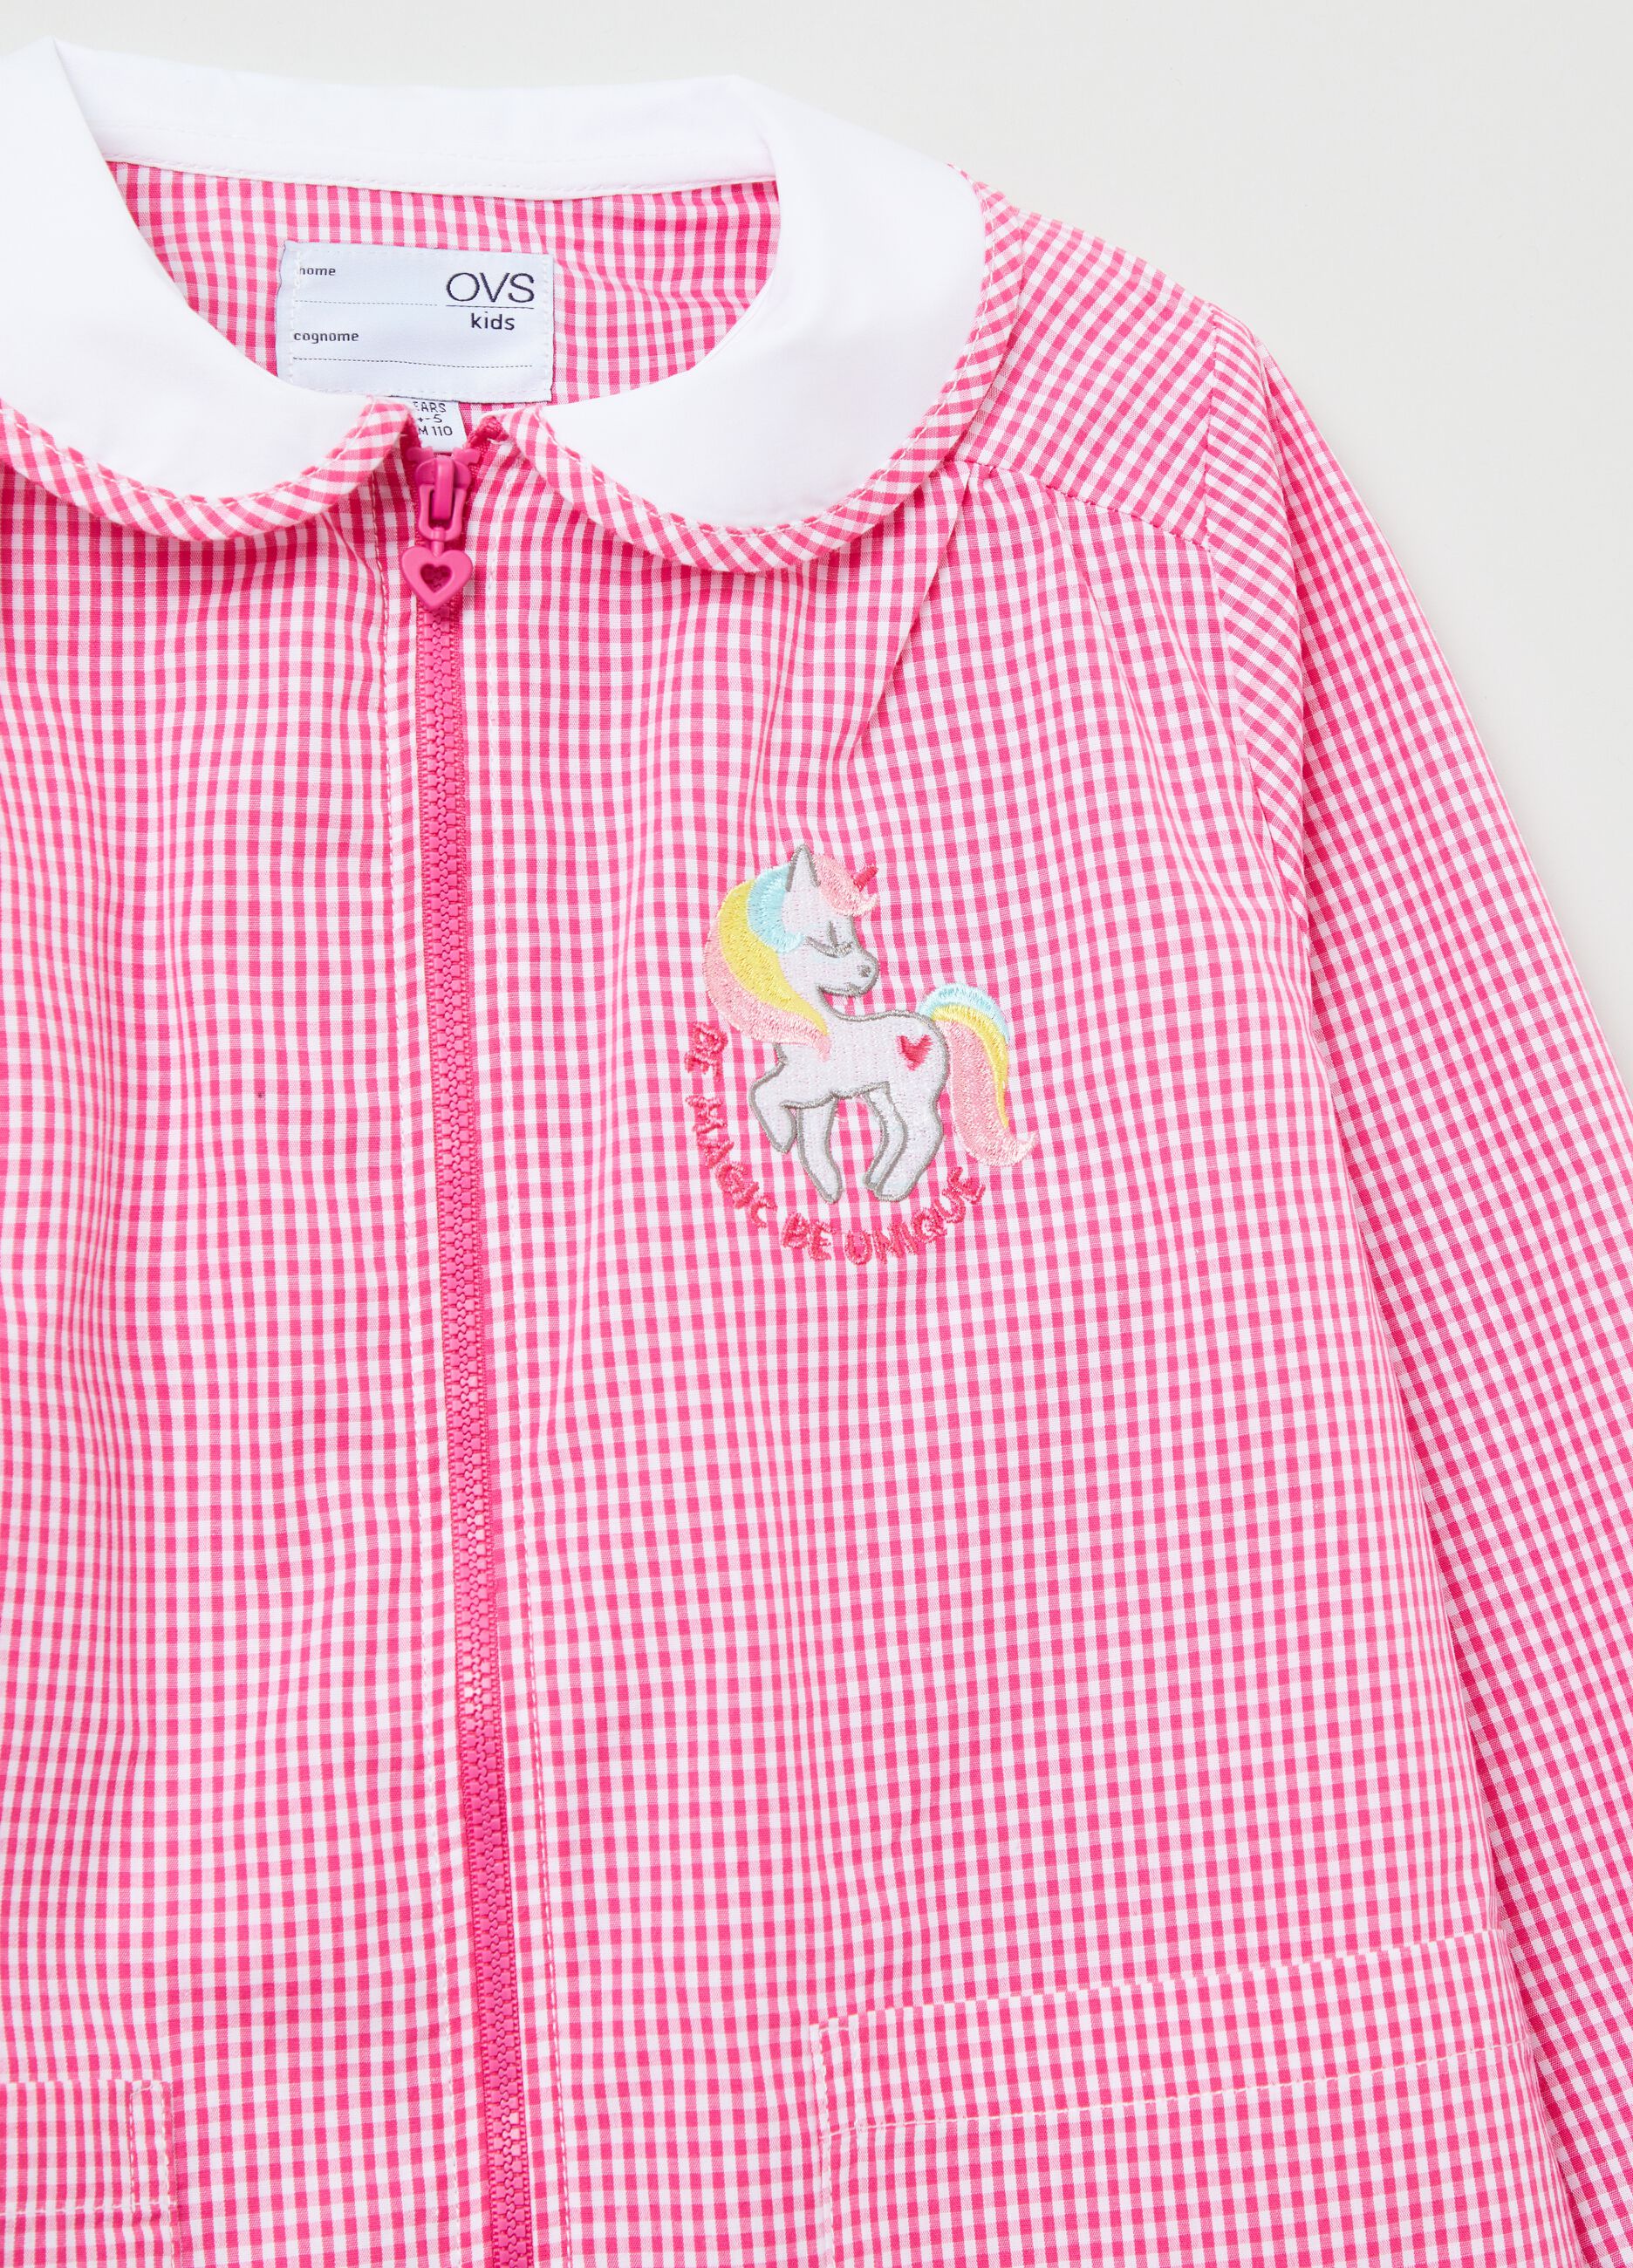 School smock with embroidered unicorn and zip_2